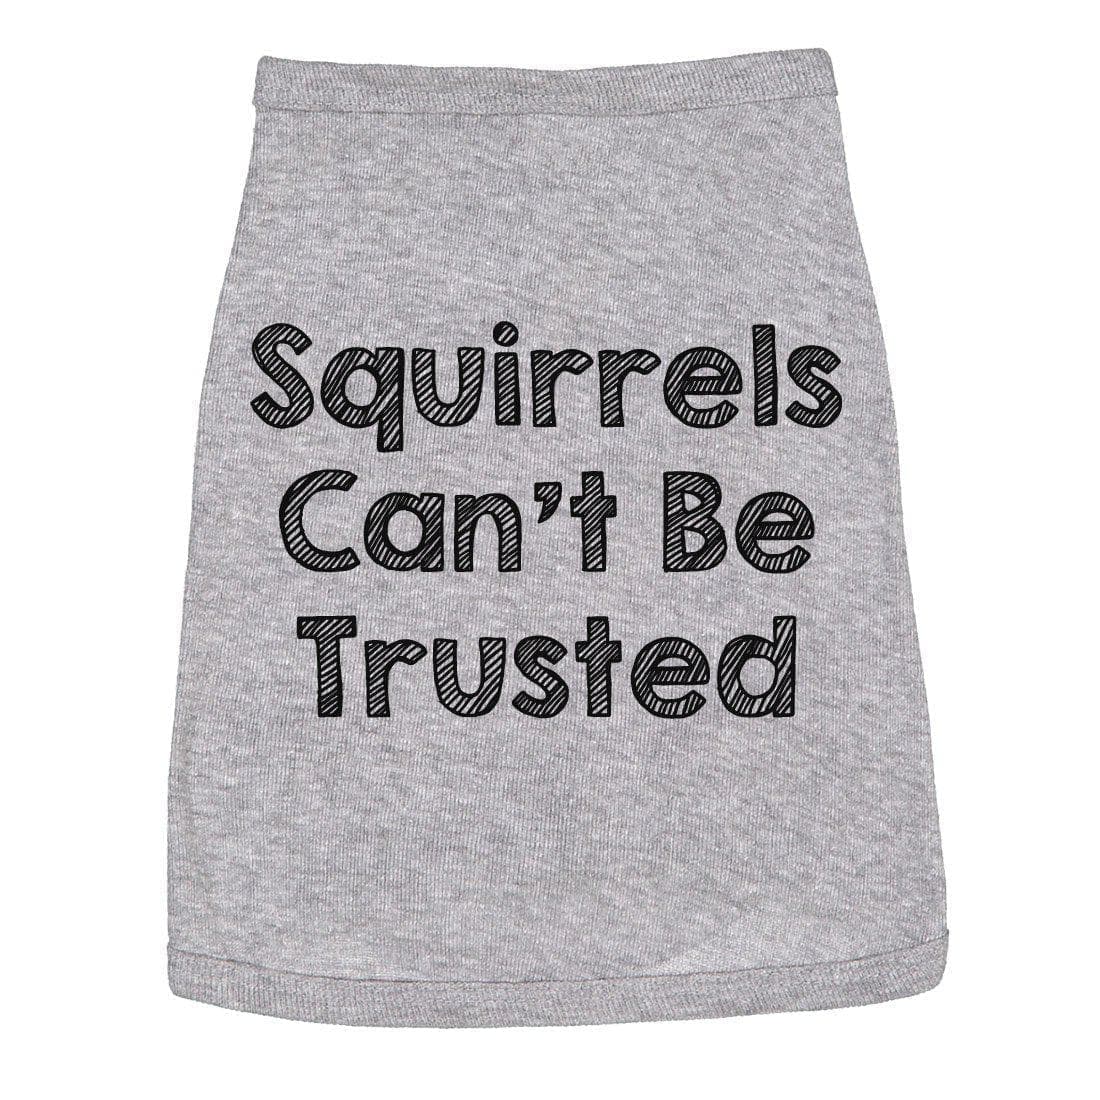 Squirrels Cant Be Trusted Dog Shirt - Crazy Dog T-Shirts